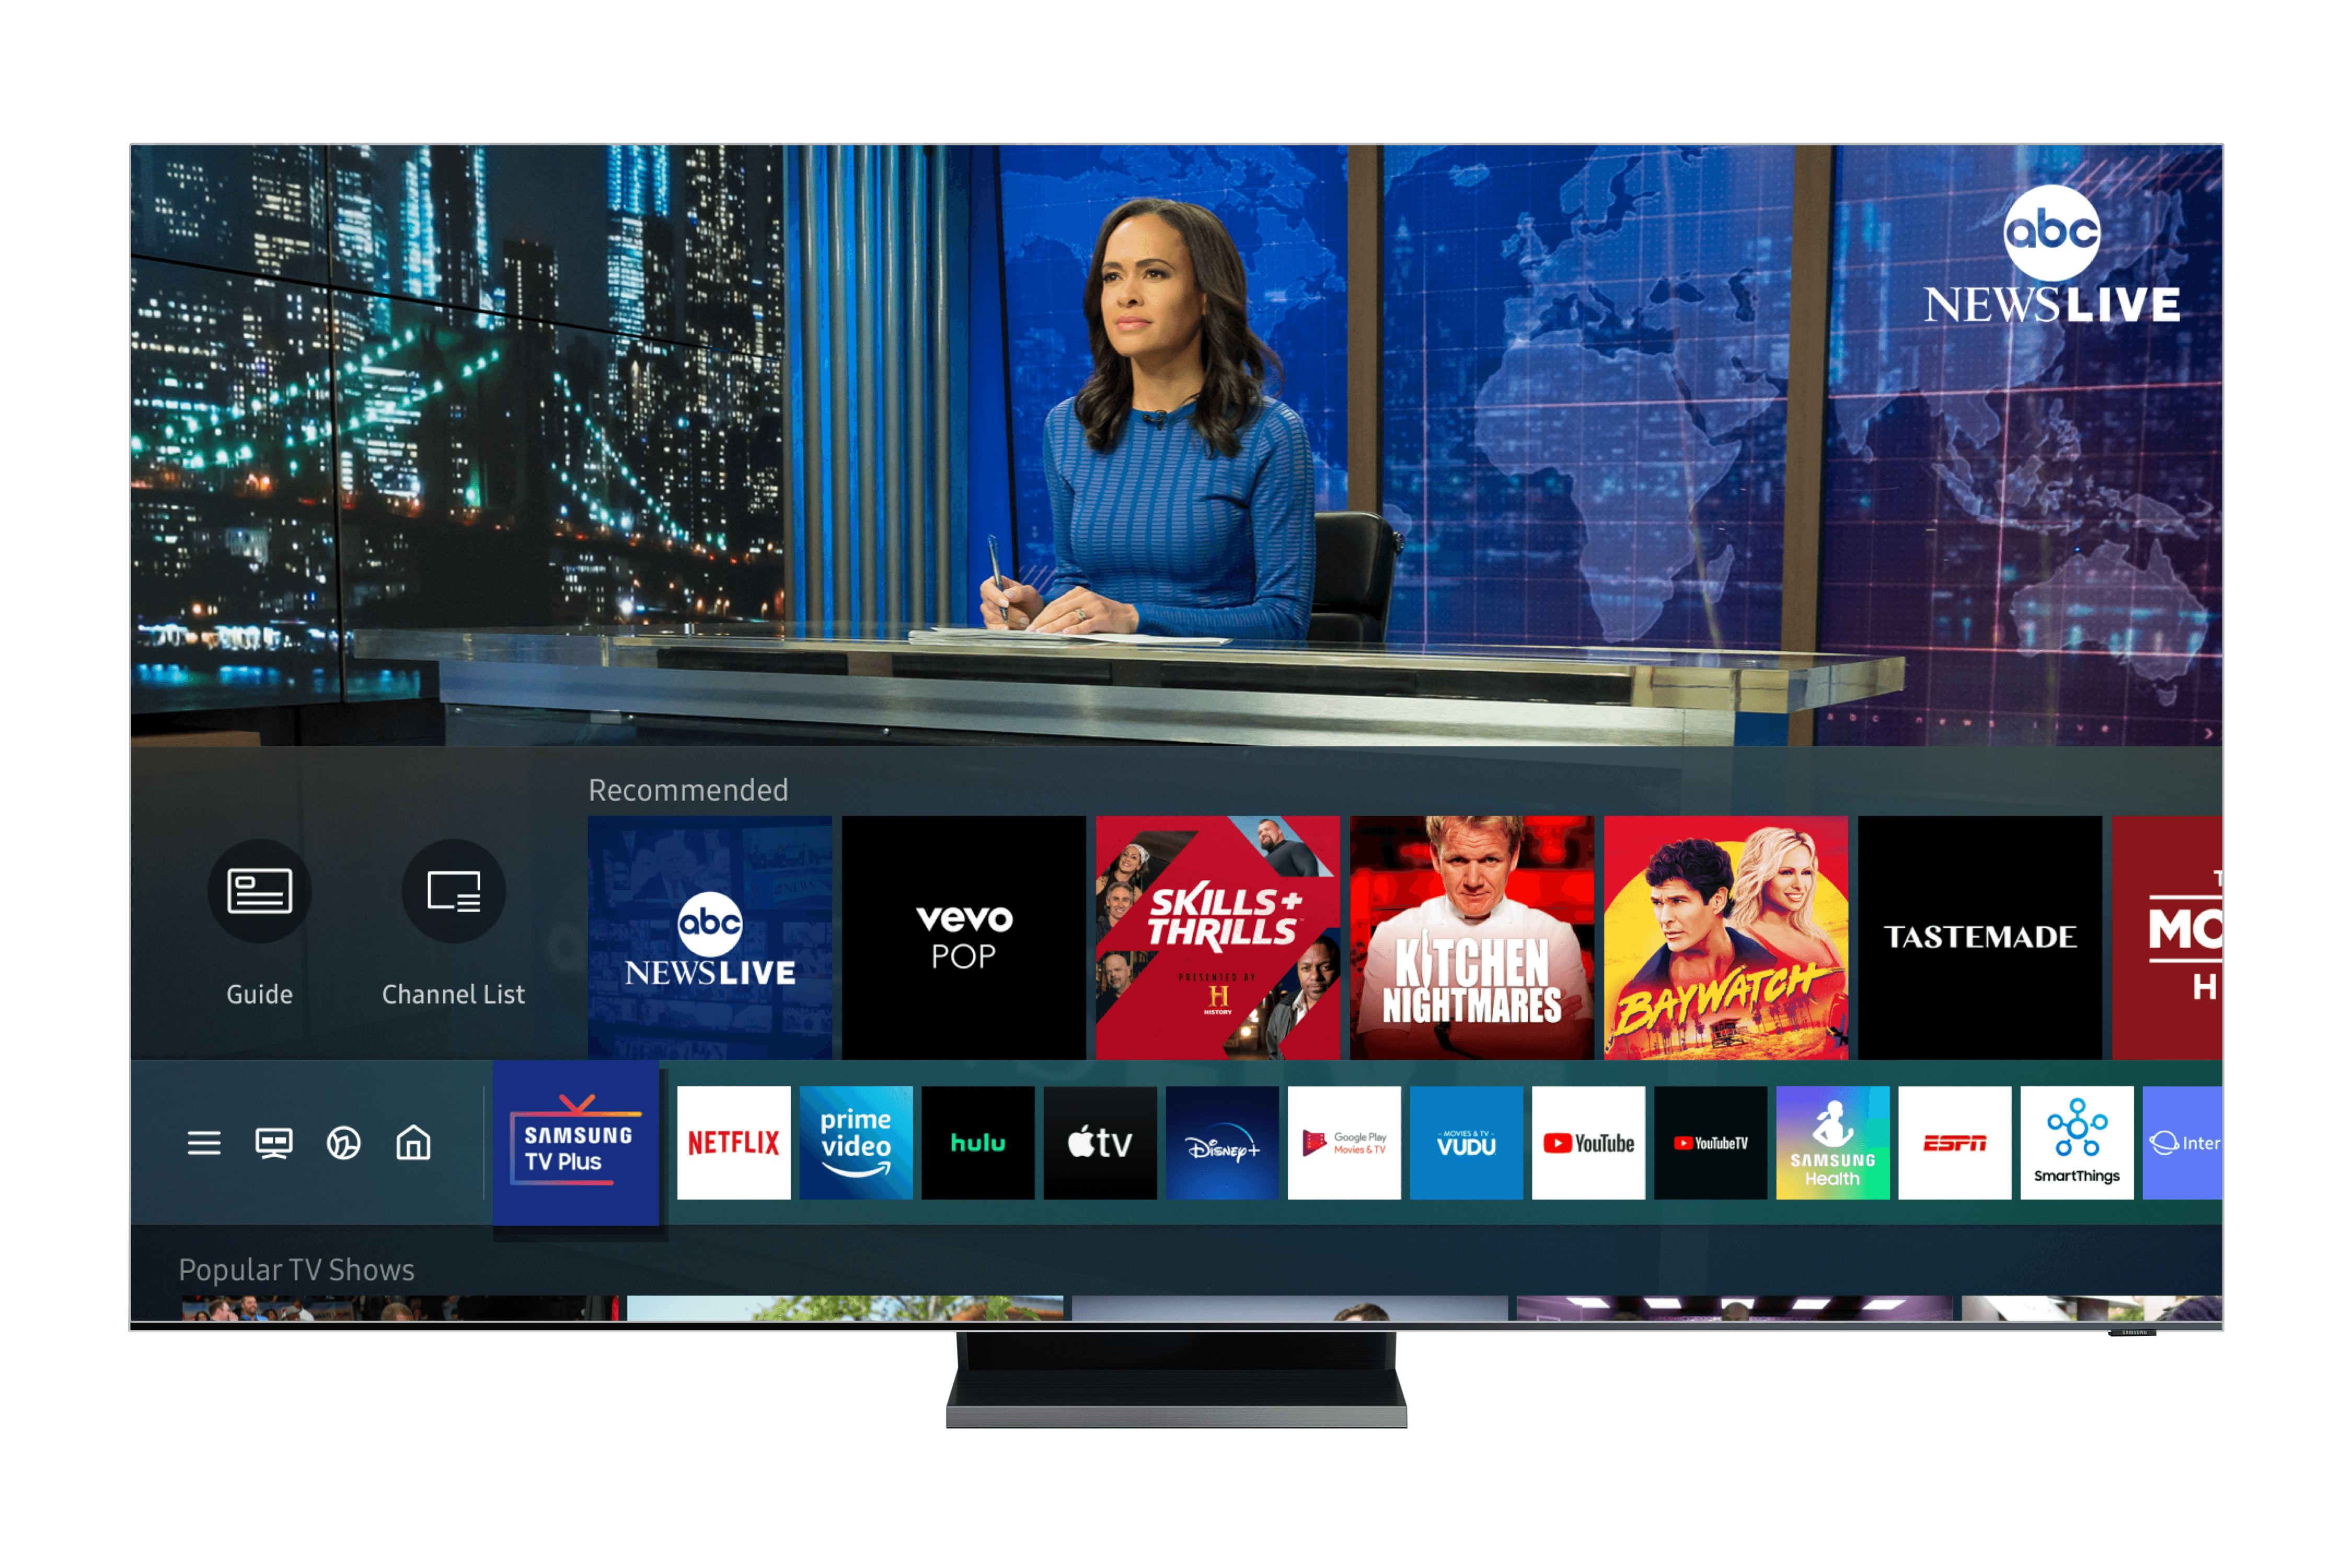 ABC News Live is Now Available on Samsung Smart TVs